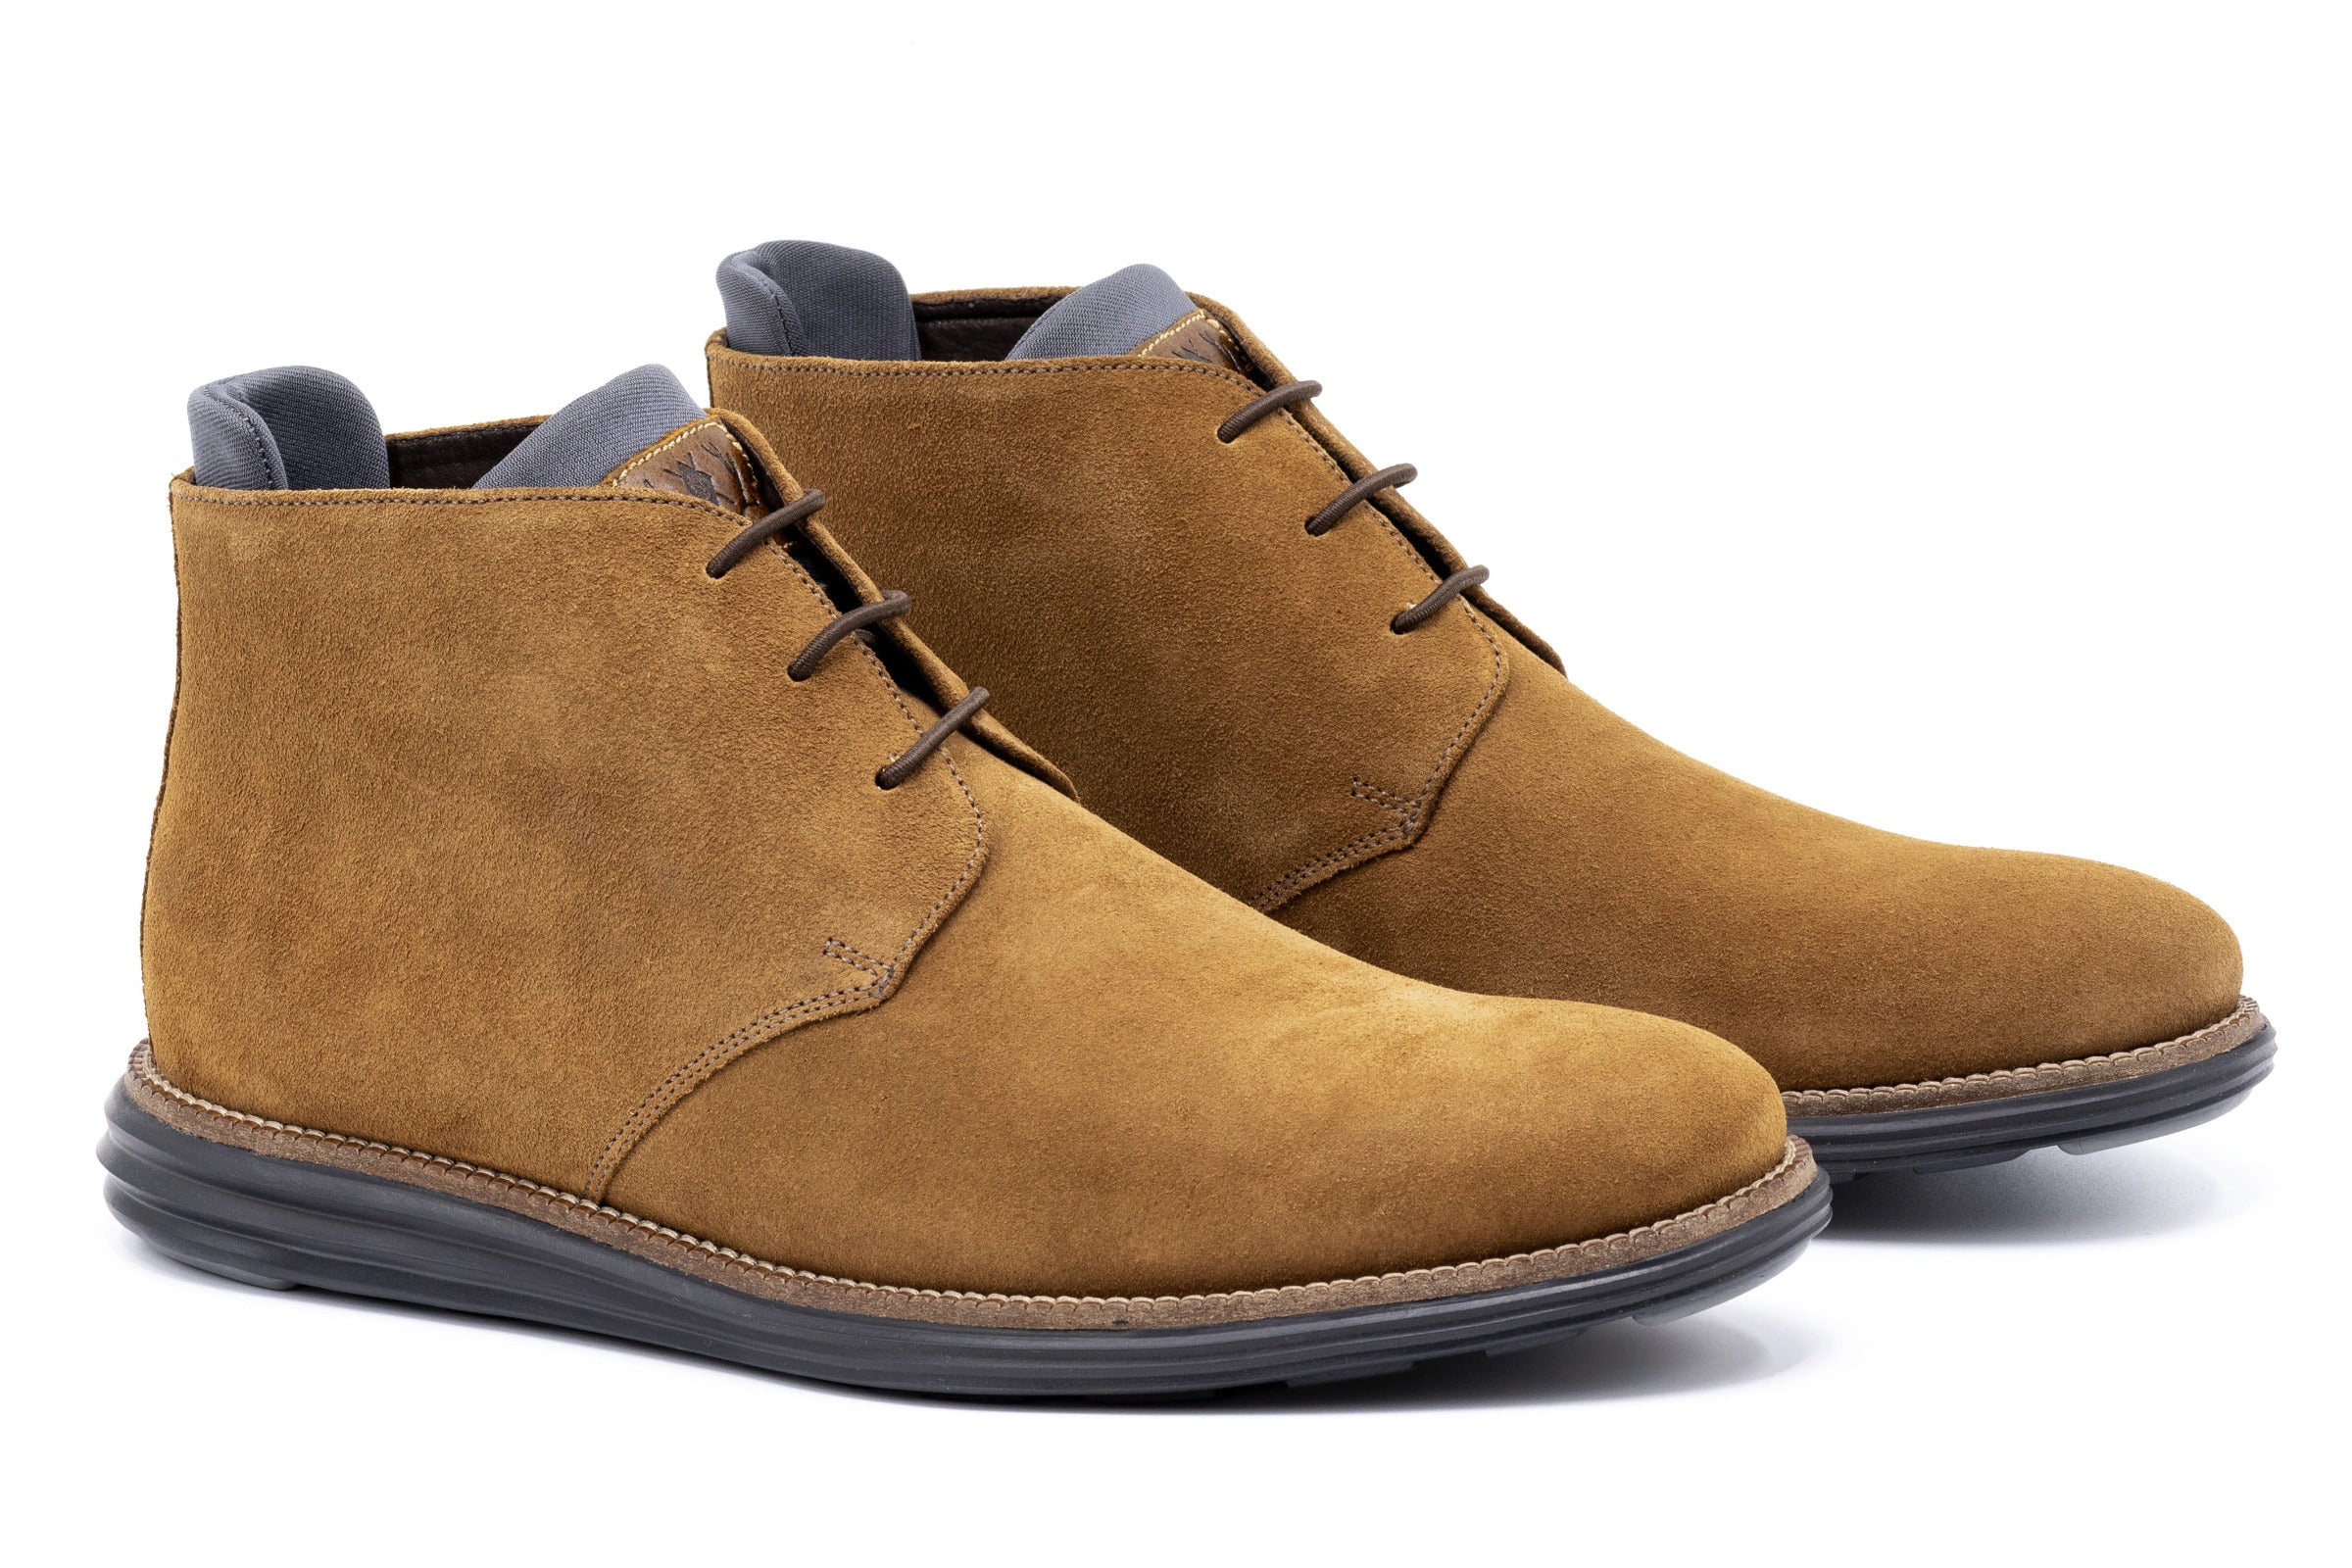 Countryaire Suede Chukka Boots - French Roast